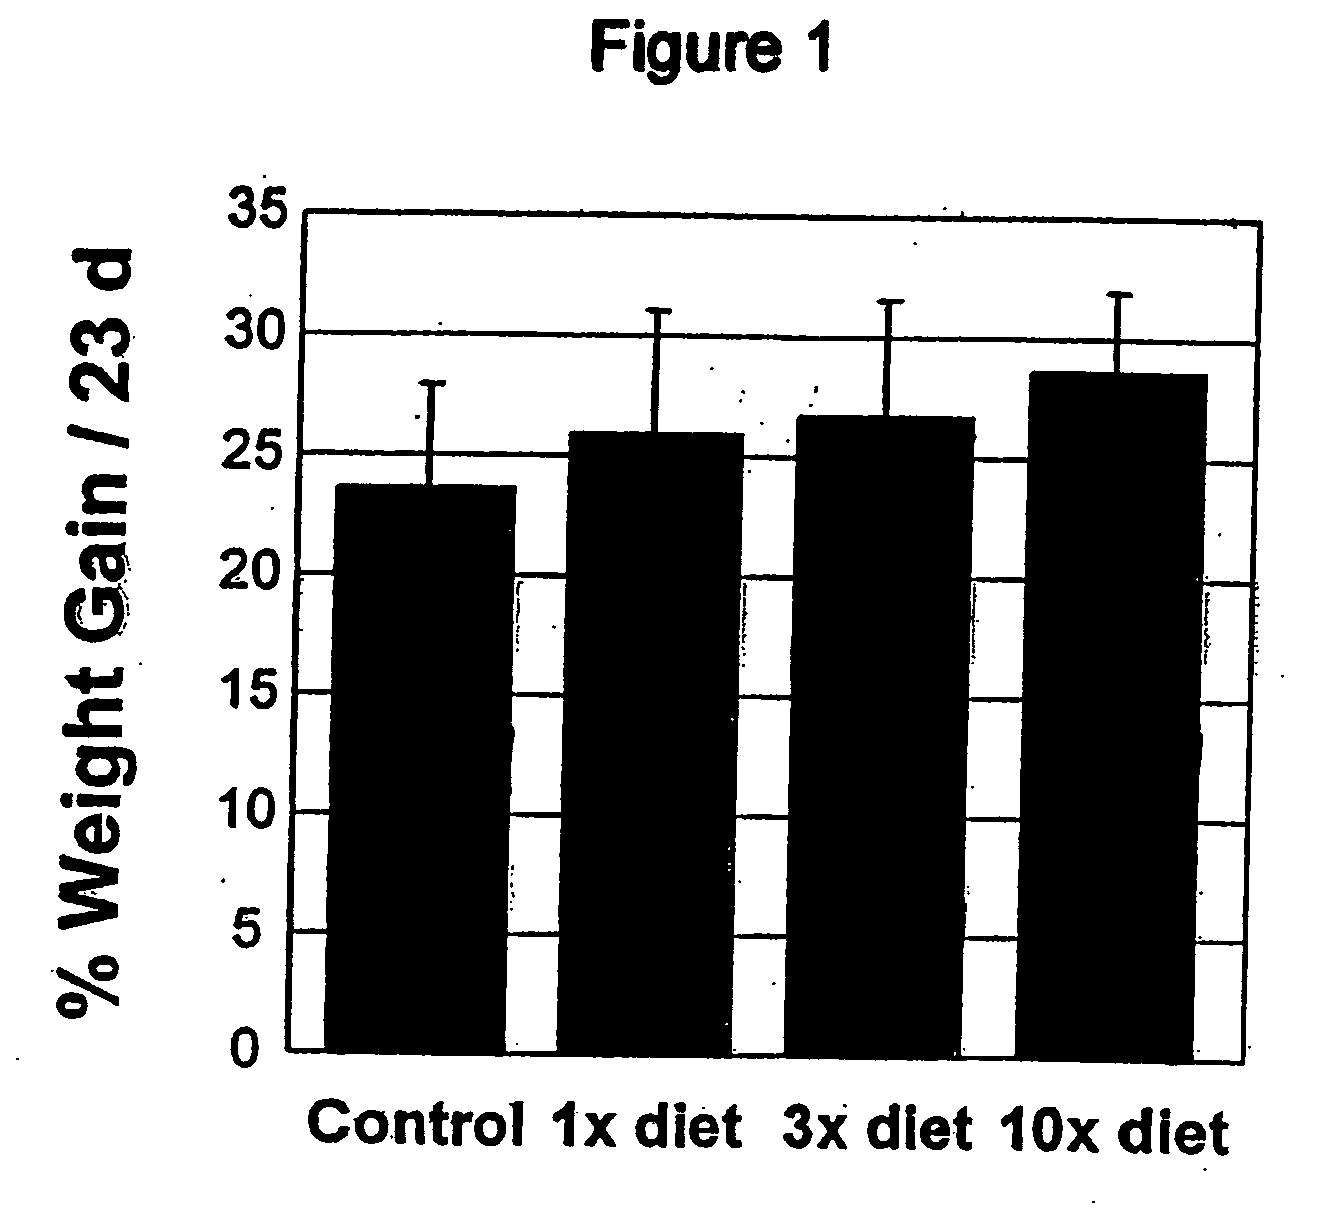 Methods for enhancing antioxidant enzyme activity and reducing C-reactive protein levels